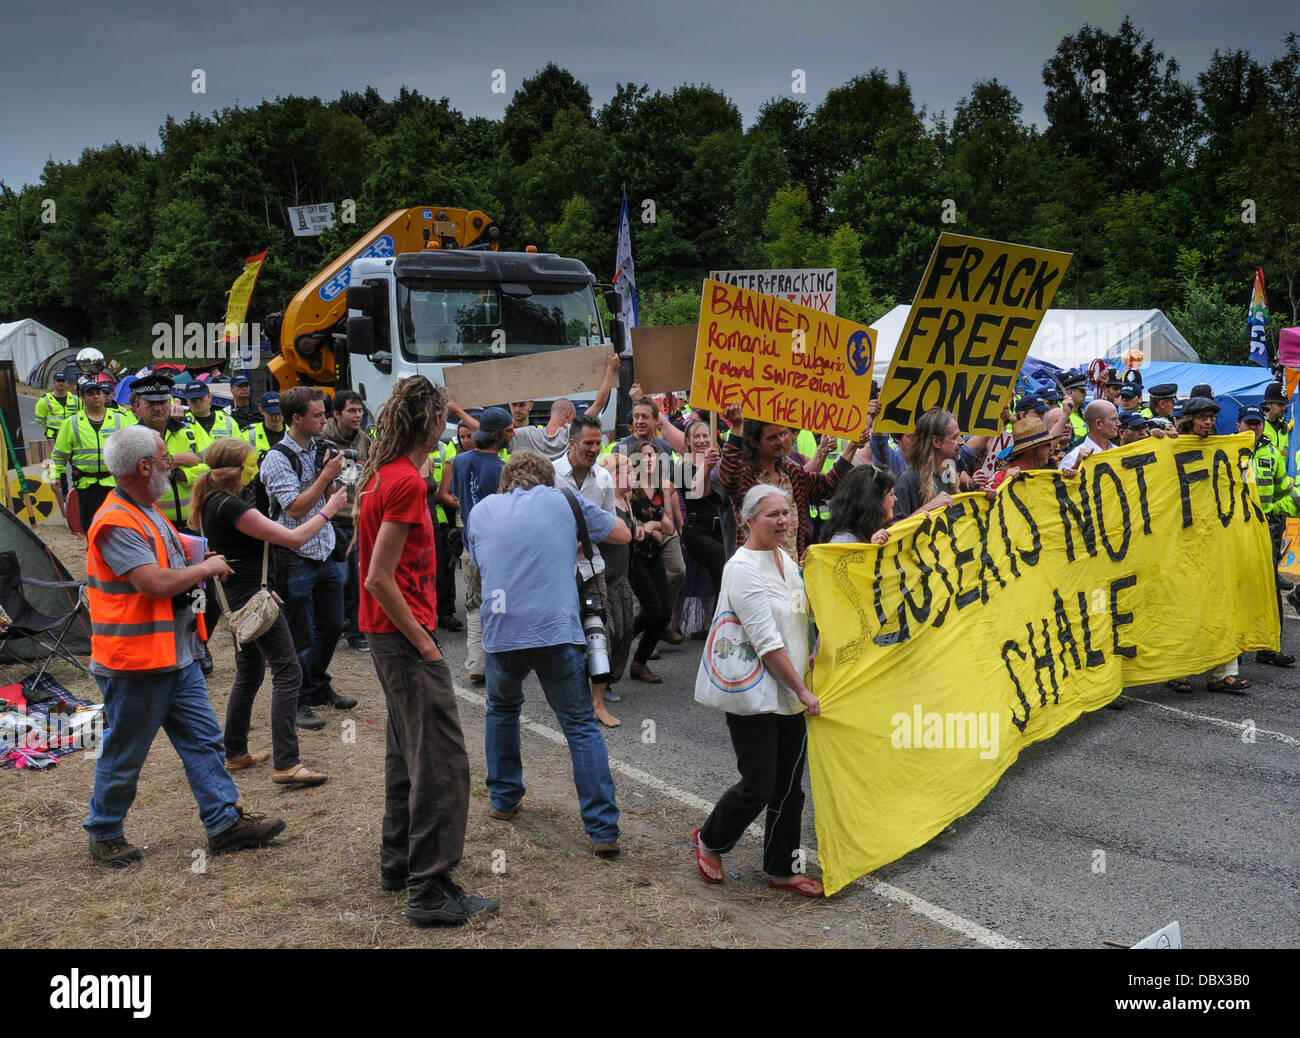 Balcombe, West Sussex, UK. 5th Aug, 2013. Anti-fracking protests continue in Balcombe, West Sussex. © David Burr/Alamy Live News Stock Photo